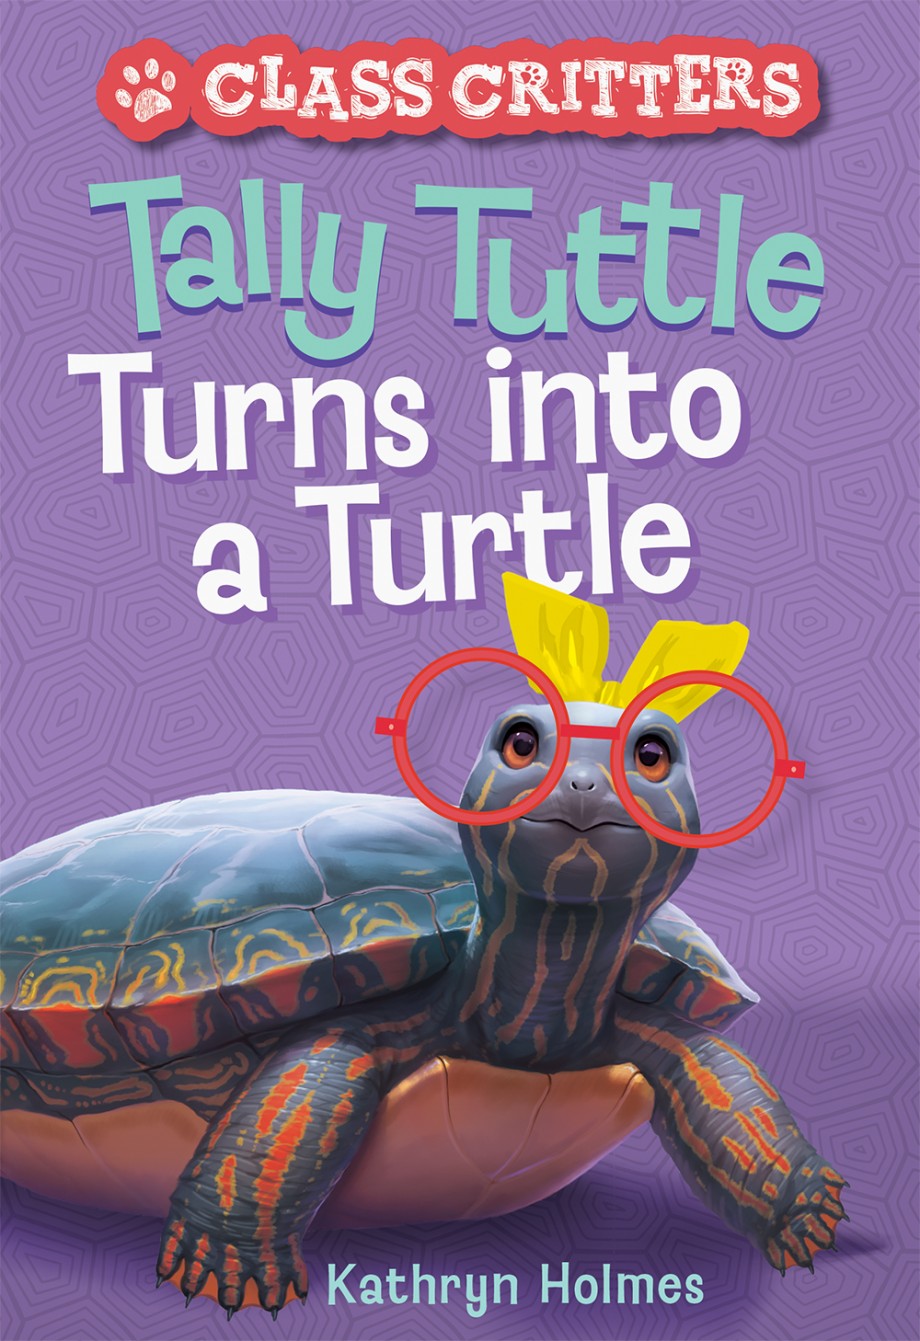 Tally Tuttle Turns into a Turtle (Class Critters #1) (Hardcover)